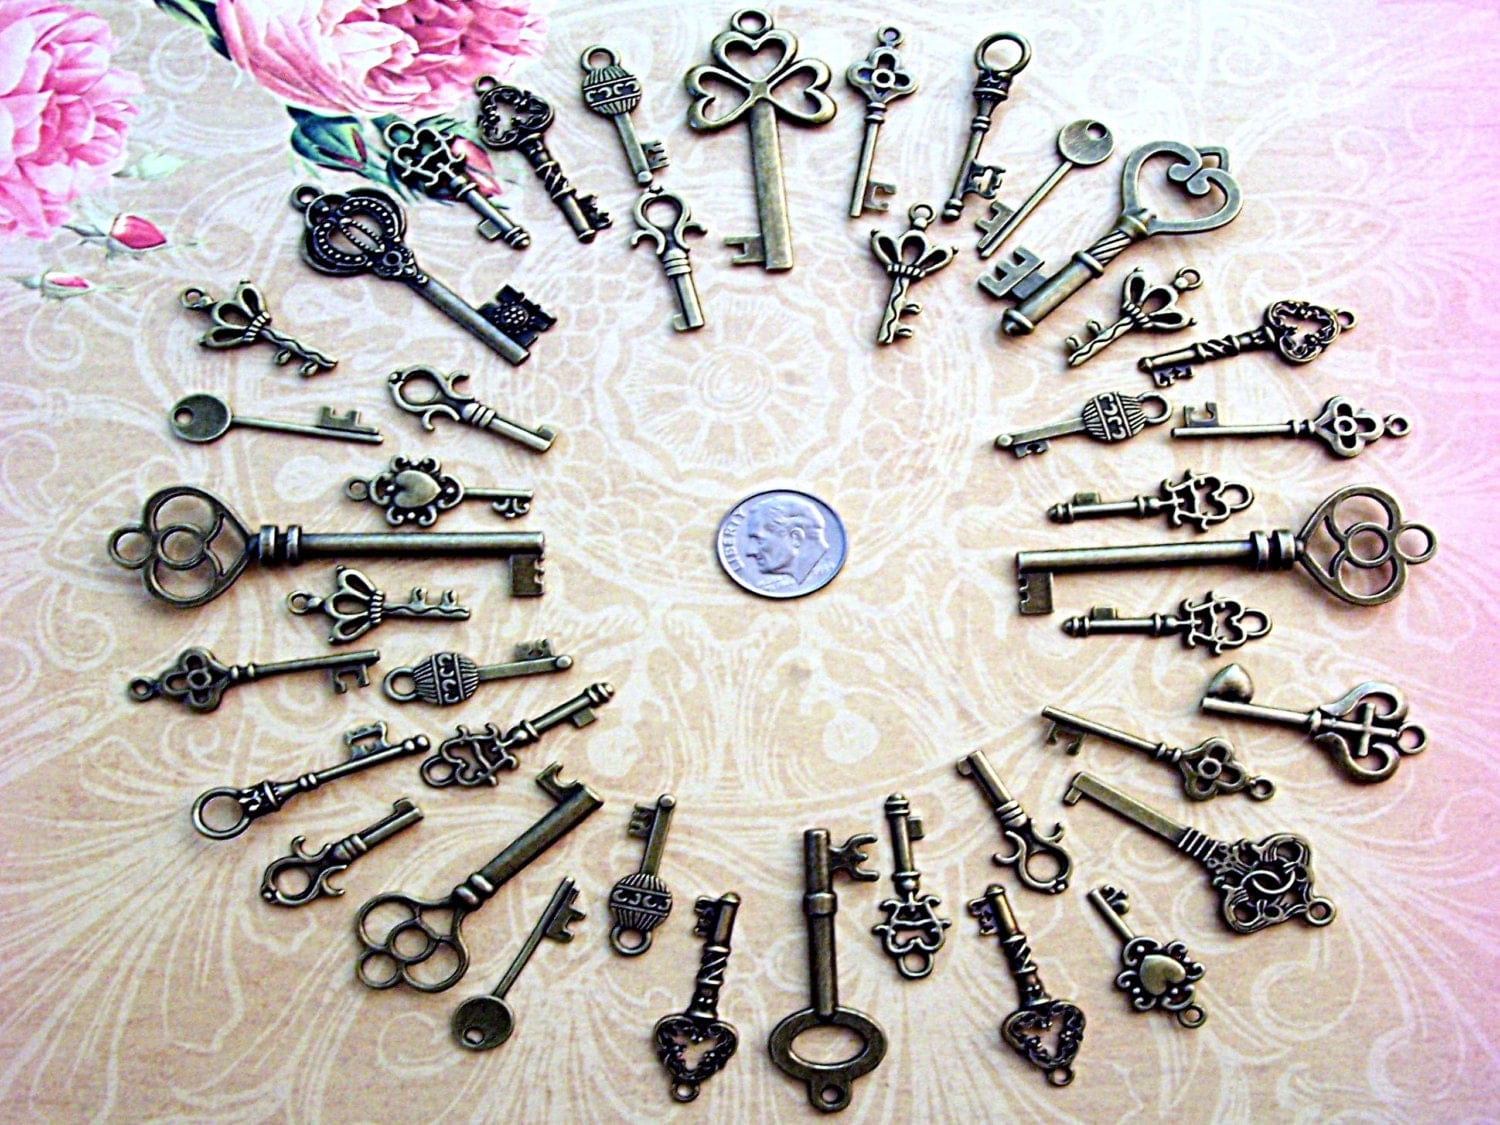 40 Steampunk Skeleton Keys Brass Charms Jewelry Gothic Wedding Beads Supplies Pendant Set Collection Reproduction Vintage Antique Look Craft